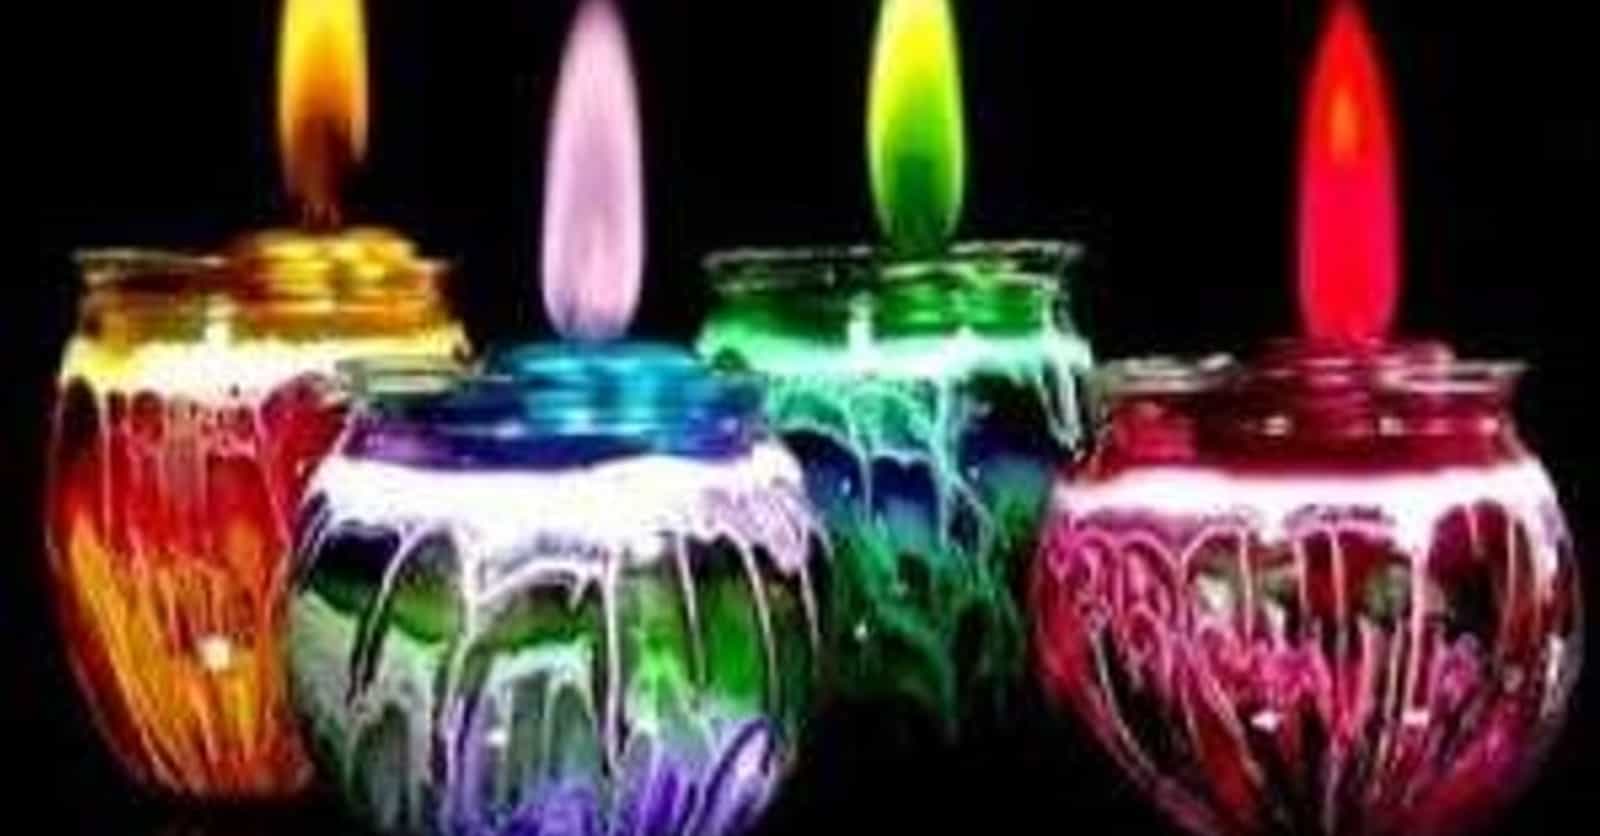 The Top 10 Candle Companies